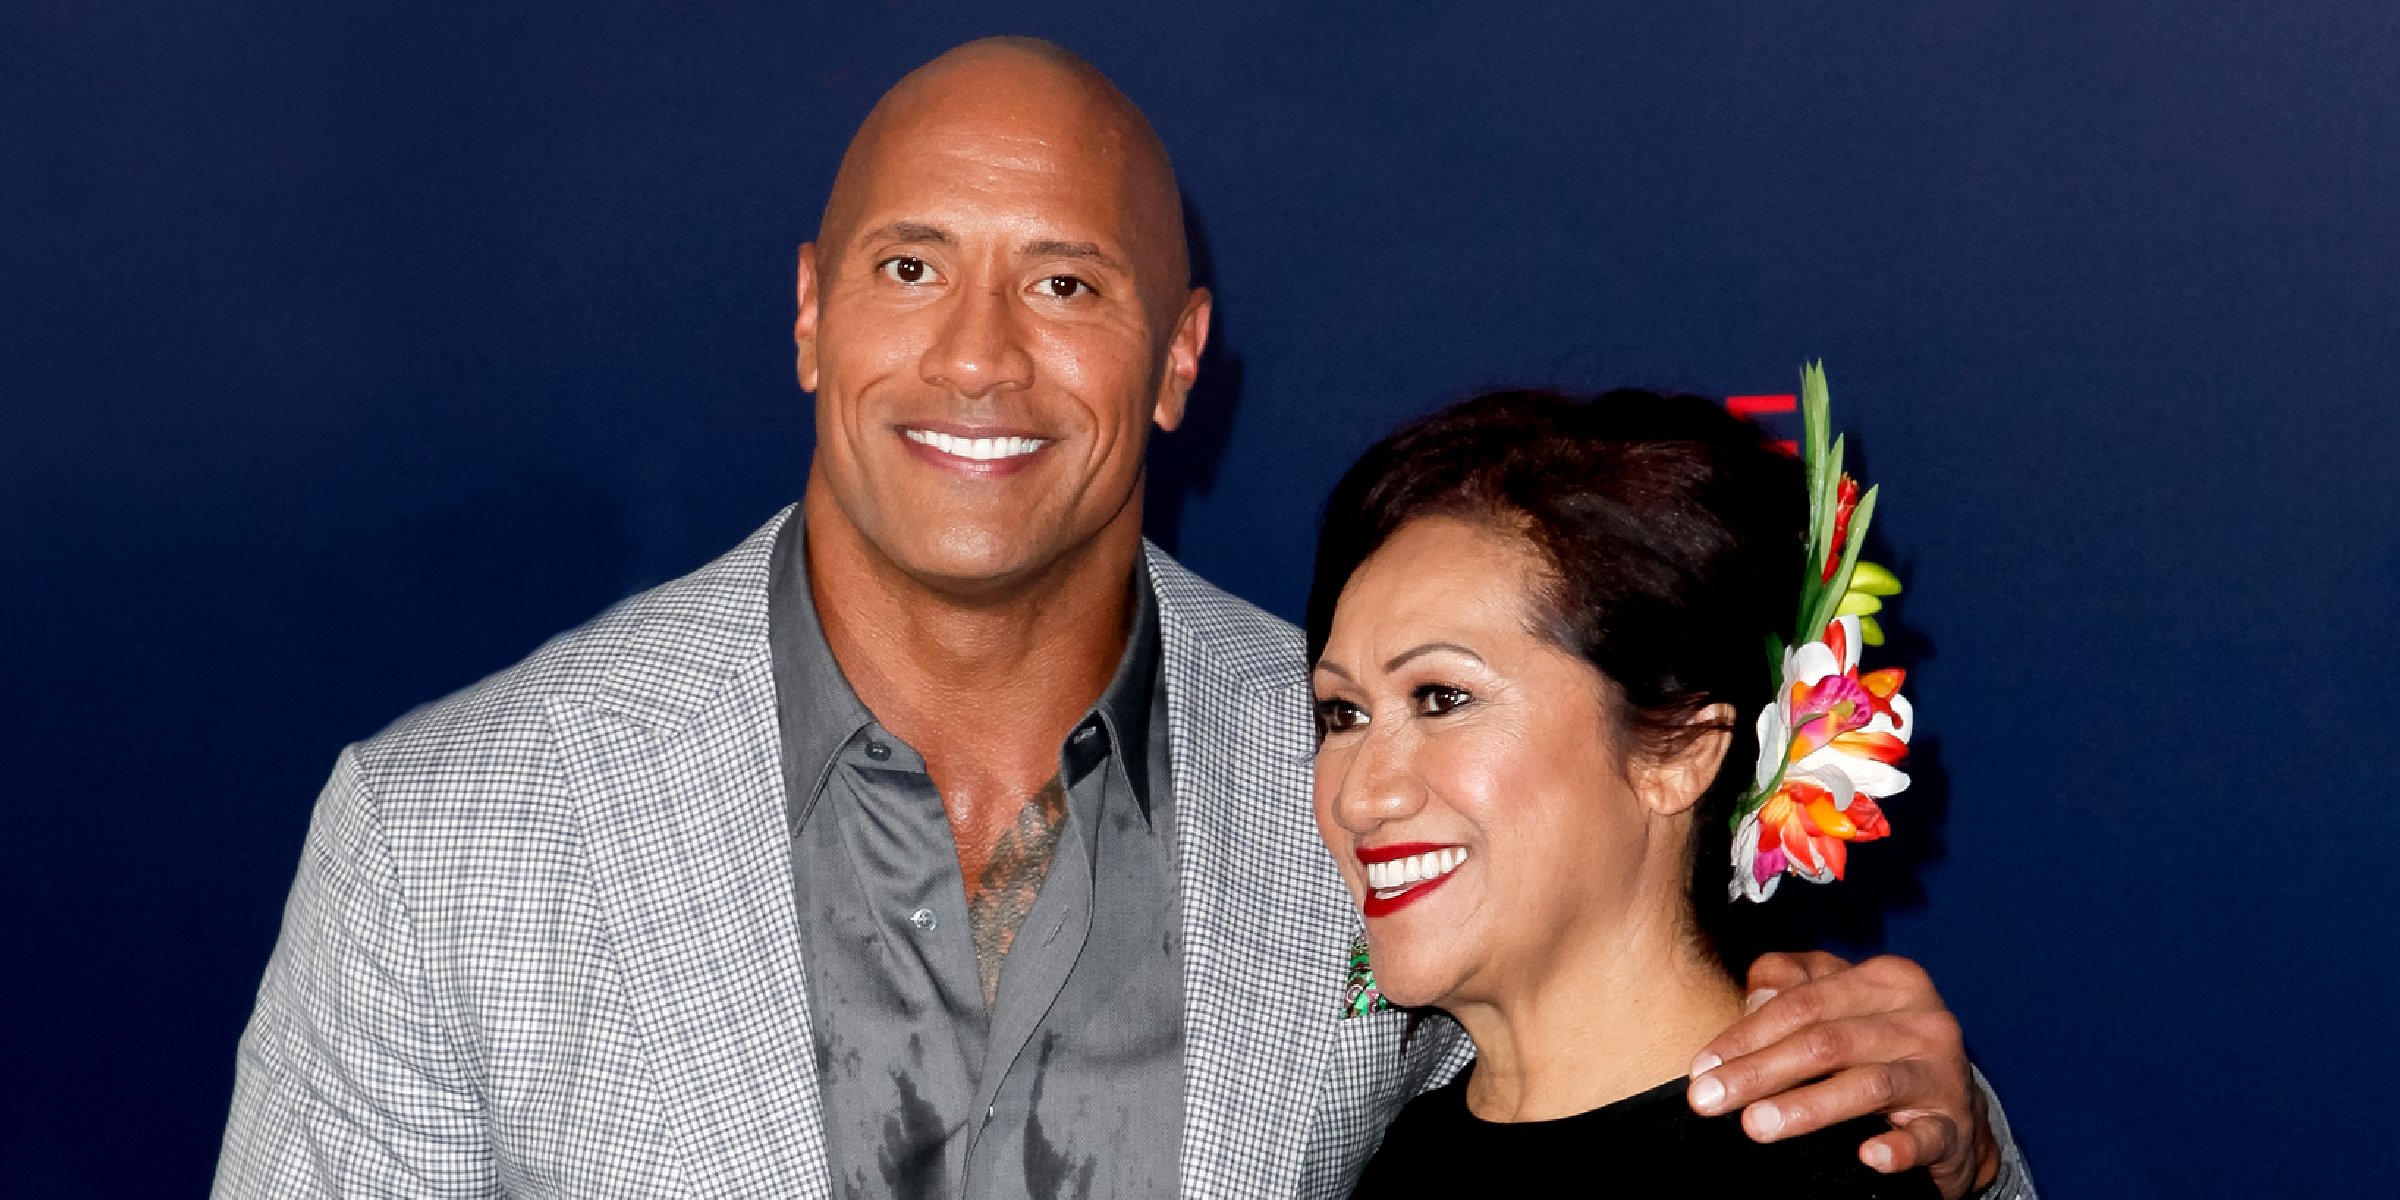 Dwayne Johnson and his mother Ata Johnson | Source: Getty Images